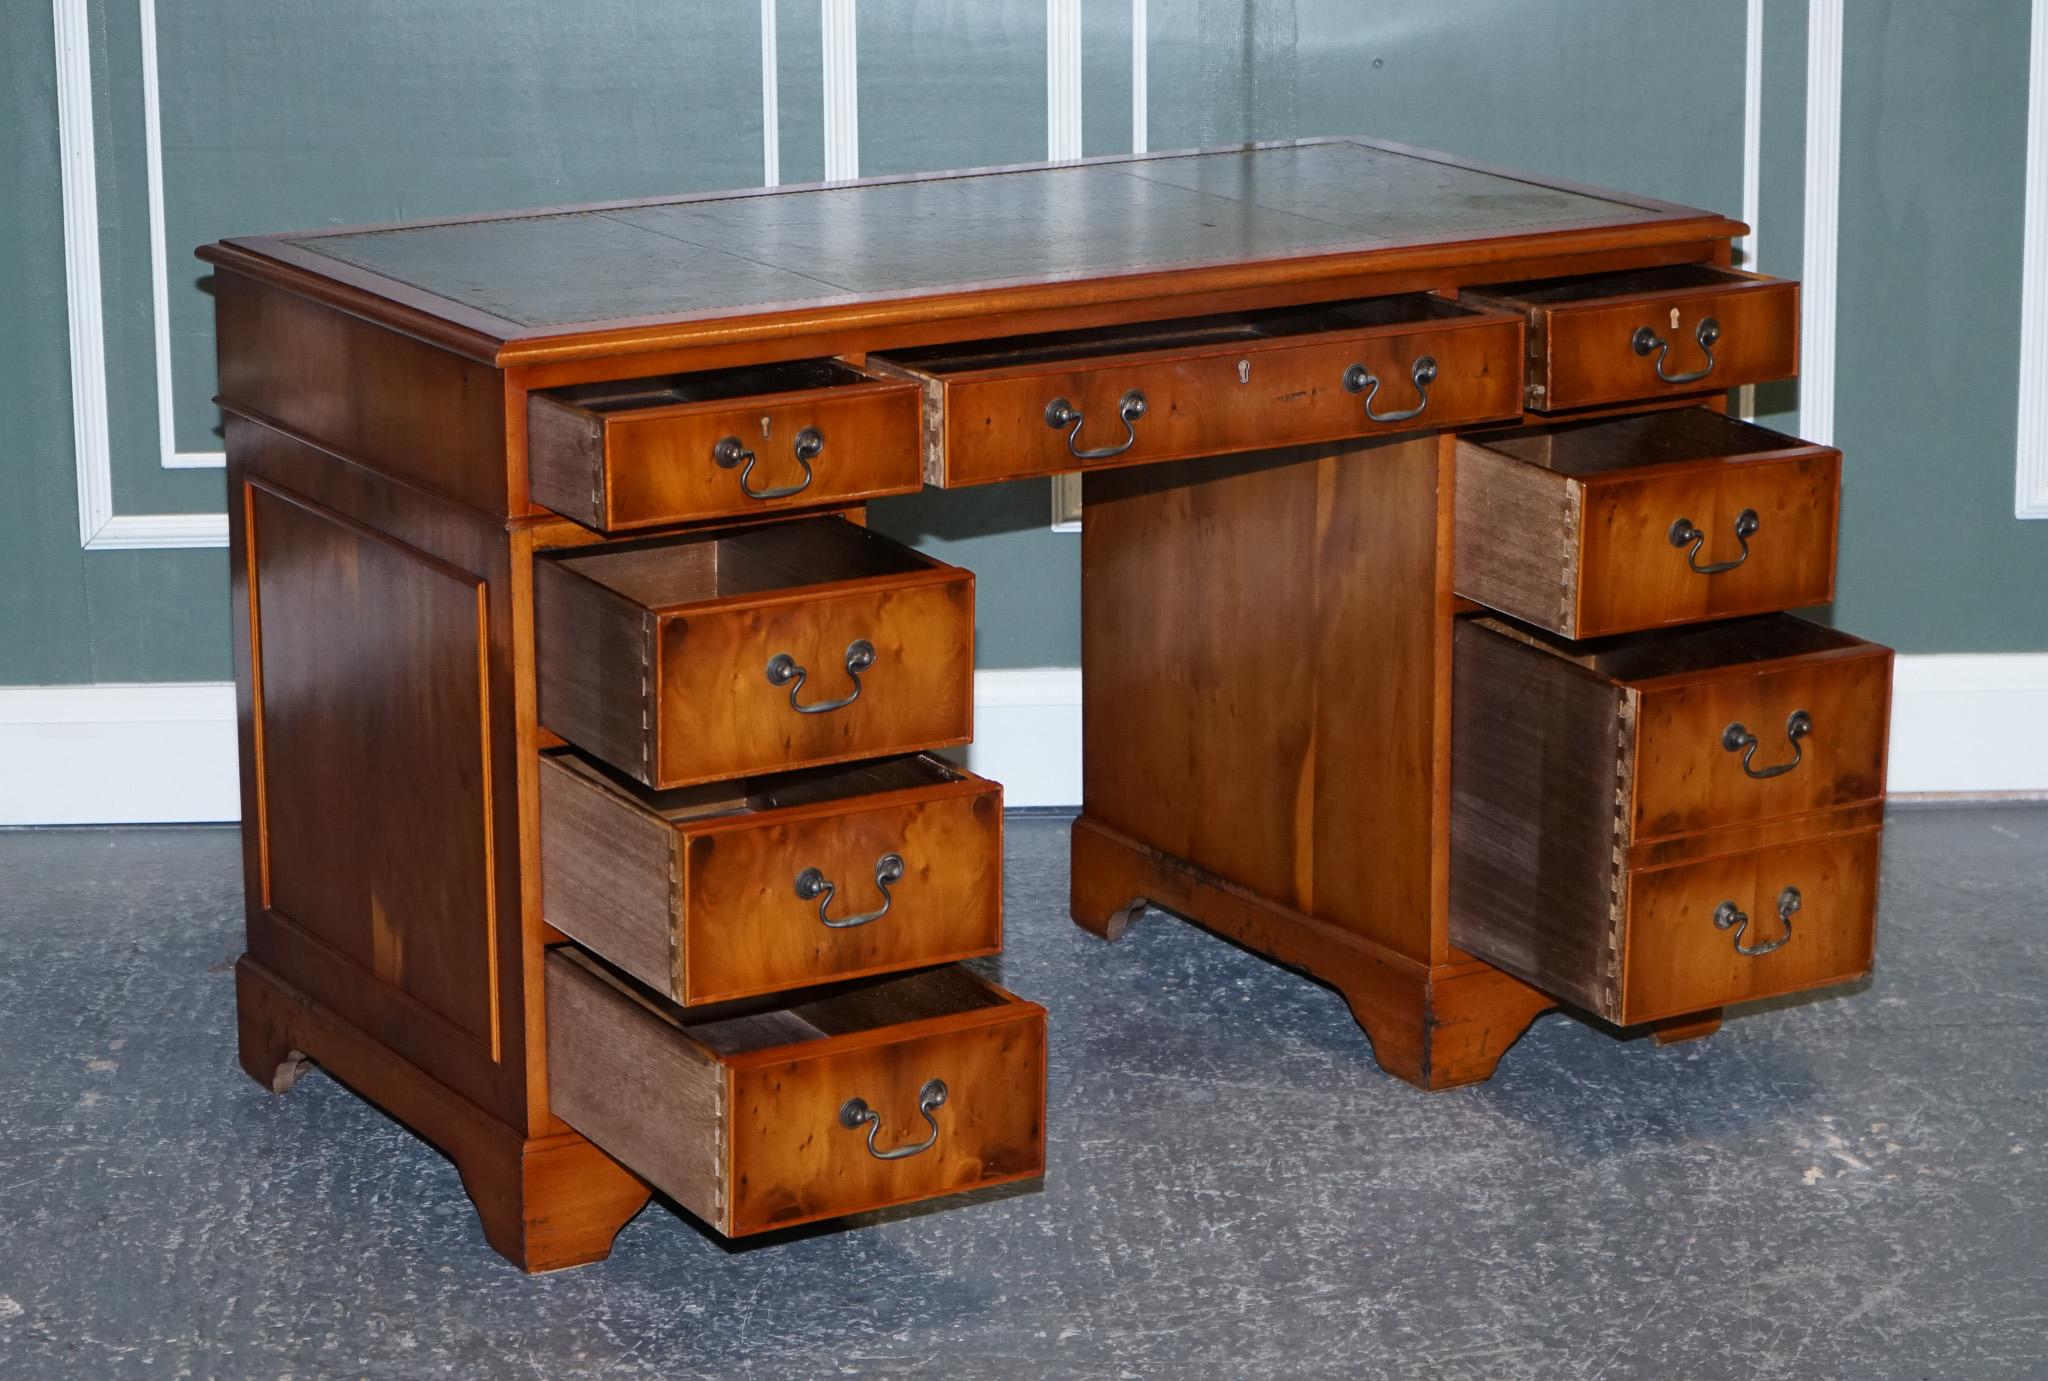 We are delighted to present this stunning Twin pedestal Burr yew wood desk.

Lovely well made desk raised on two pedestals. There's a total of nine drawers to give you plenty of storage space.

The top lifts off the two pedestals but will fall